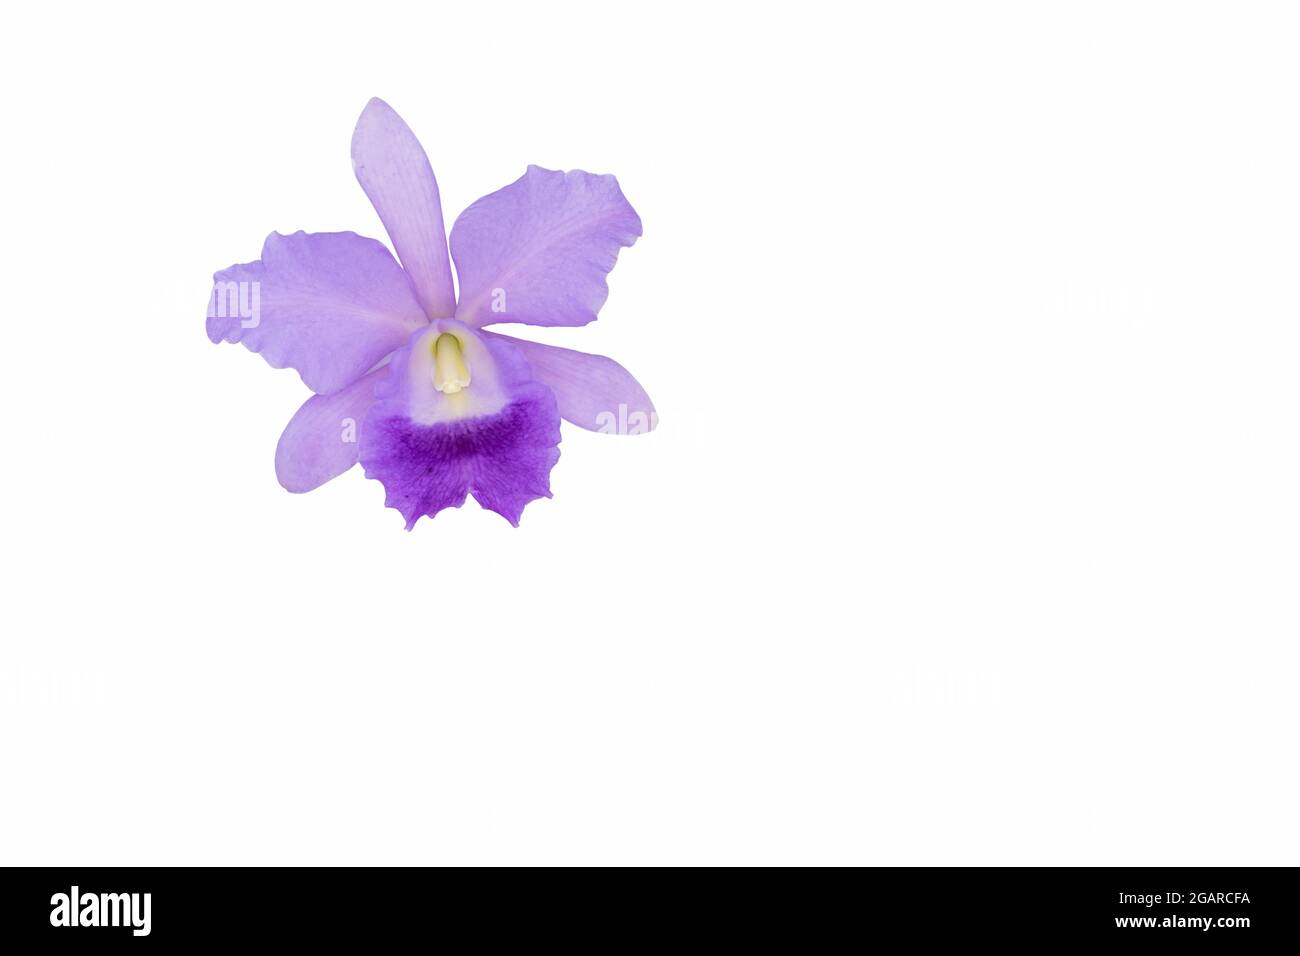 A violet Cattleya orchid isolated on a white background Stock Photo